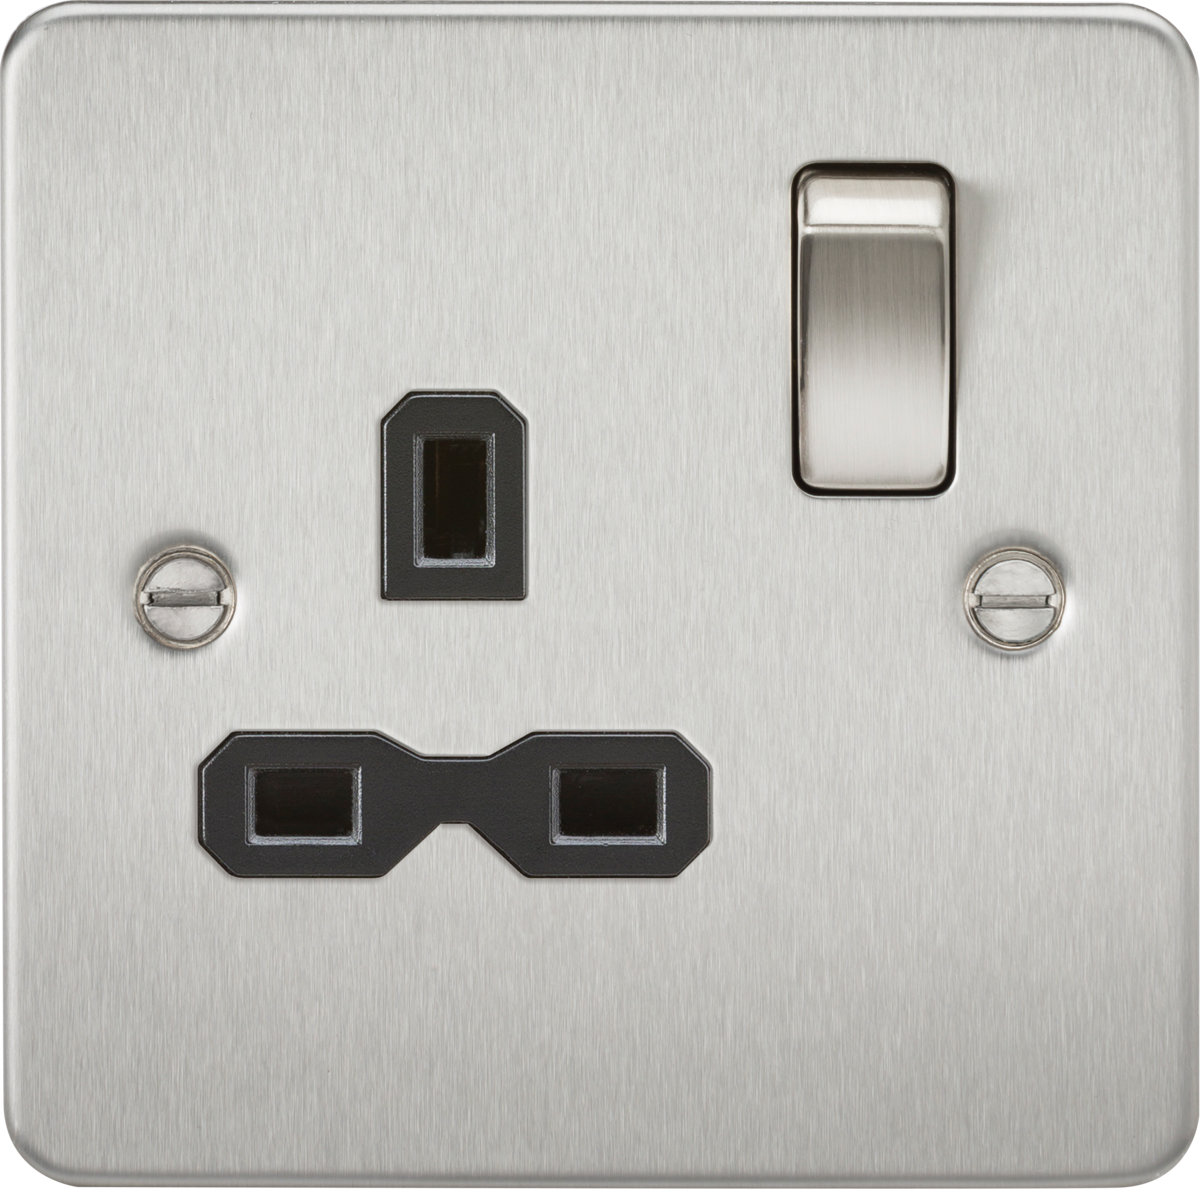 Flat plate 13A 1G DP switched socket - brushed chrome with black insert